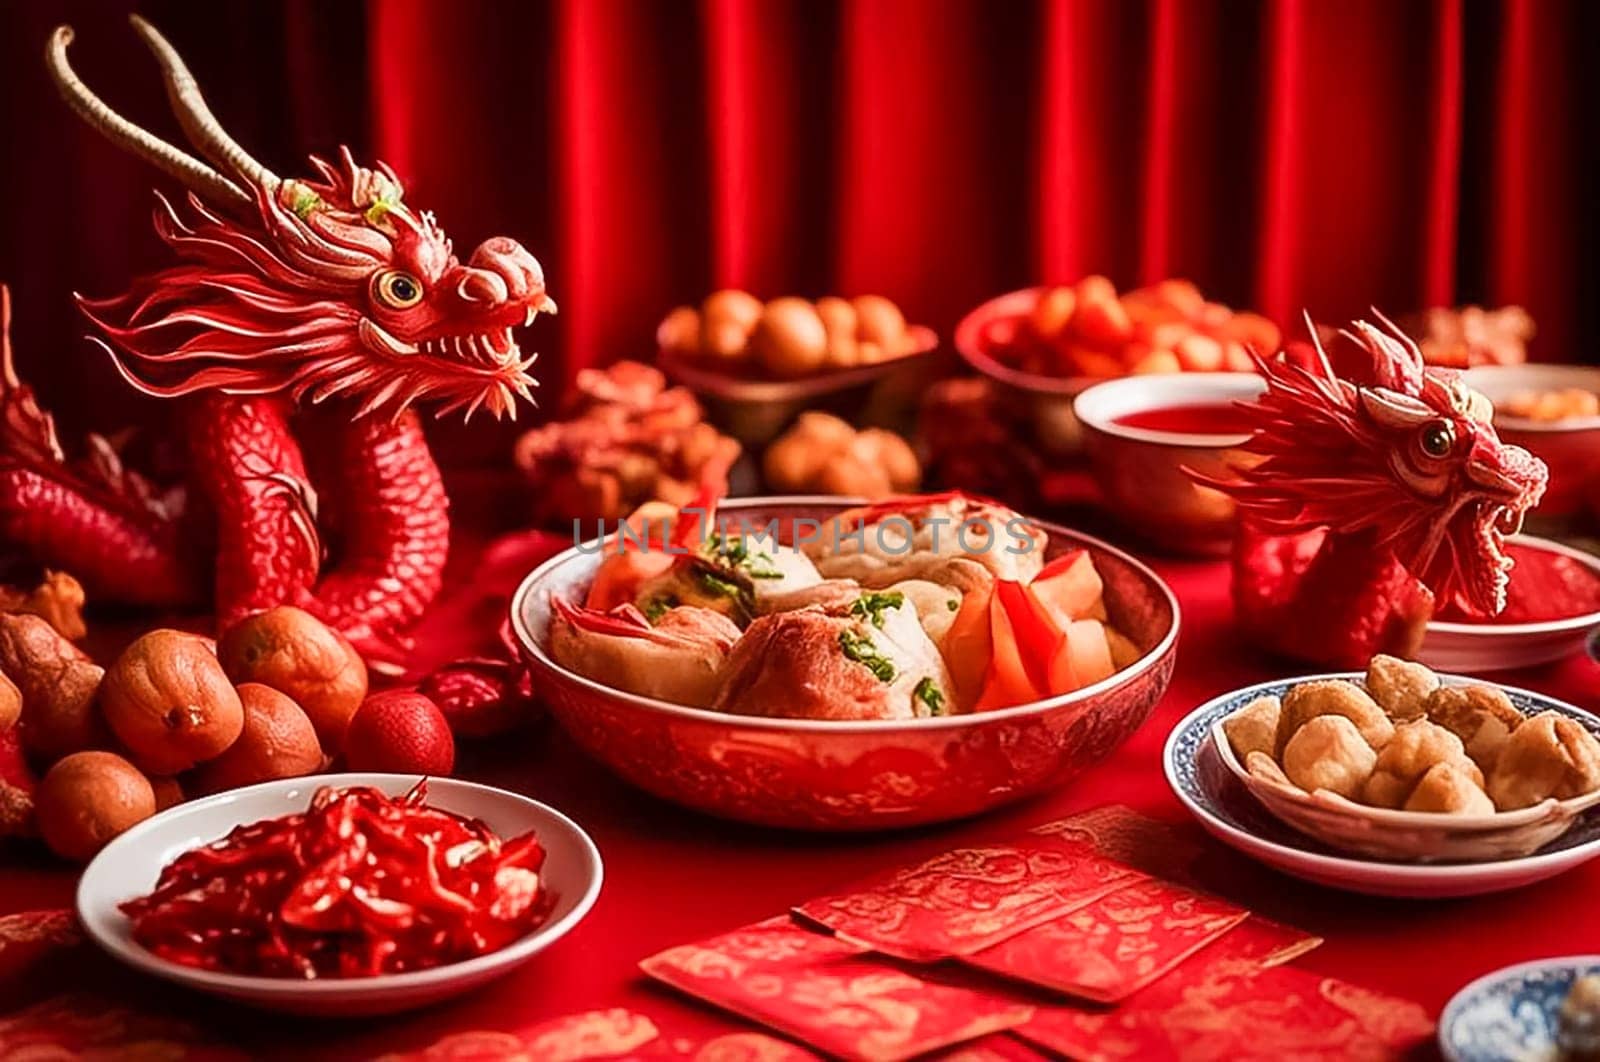 Traditional Chinese food, a variety of dishes for the lunar New year. Shallow depth of field, red solemn background by claire_lucia